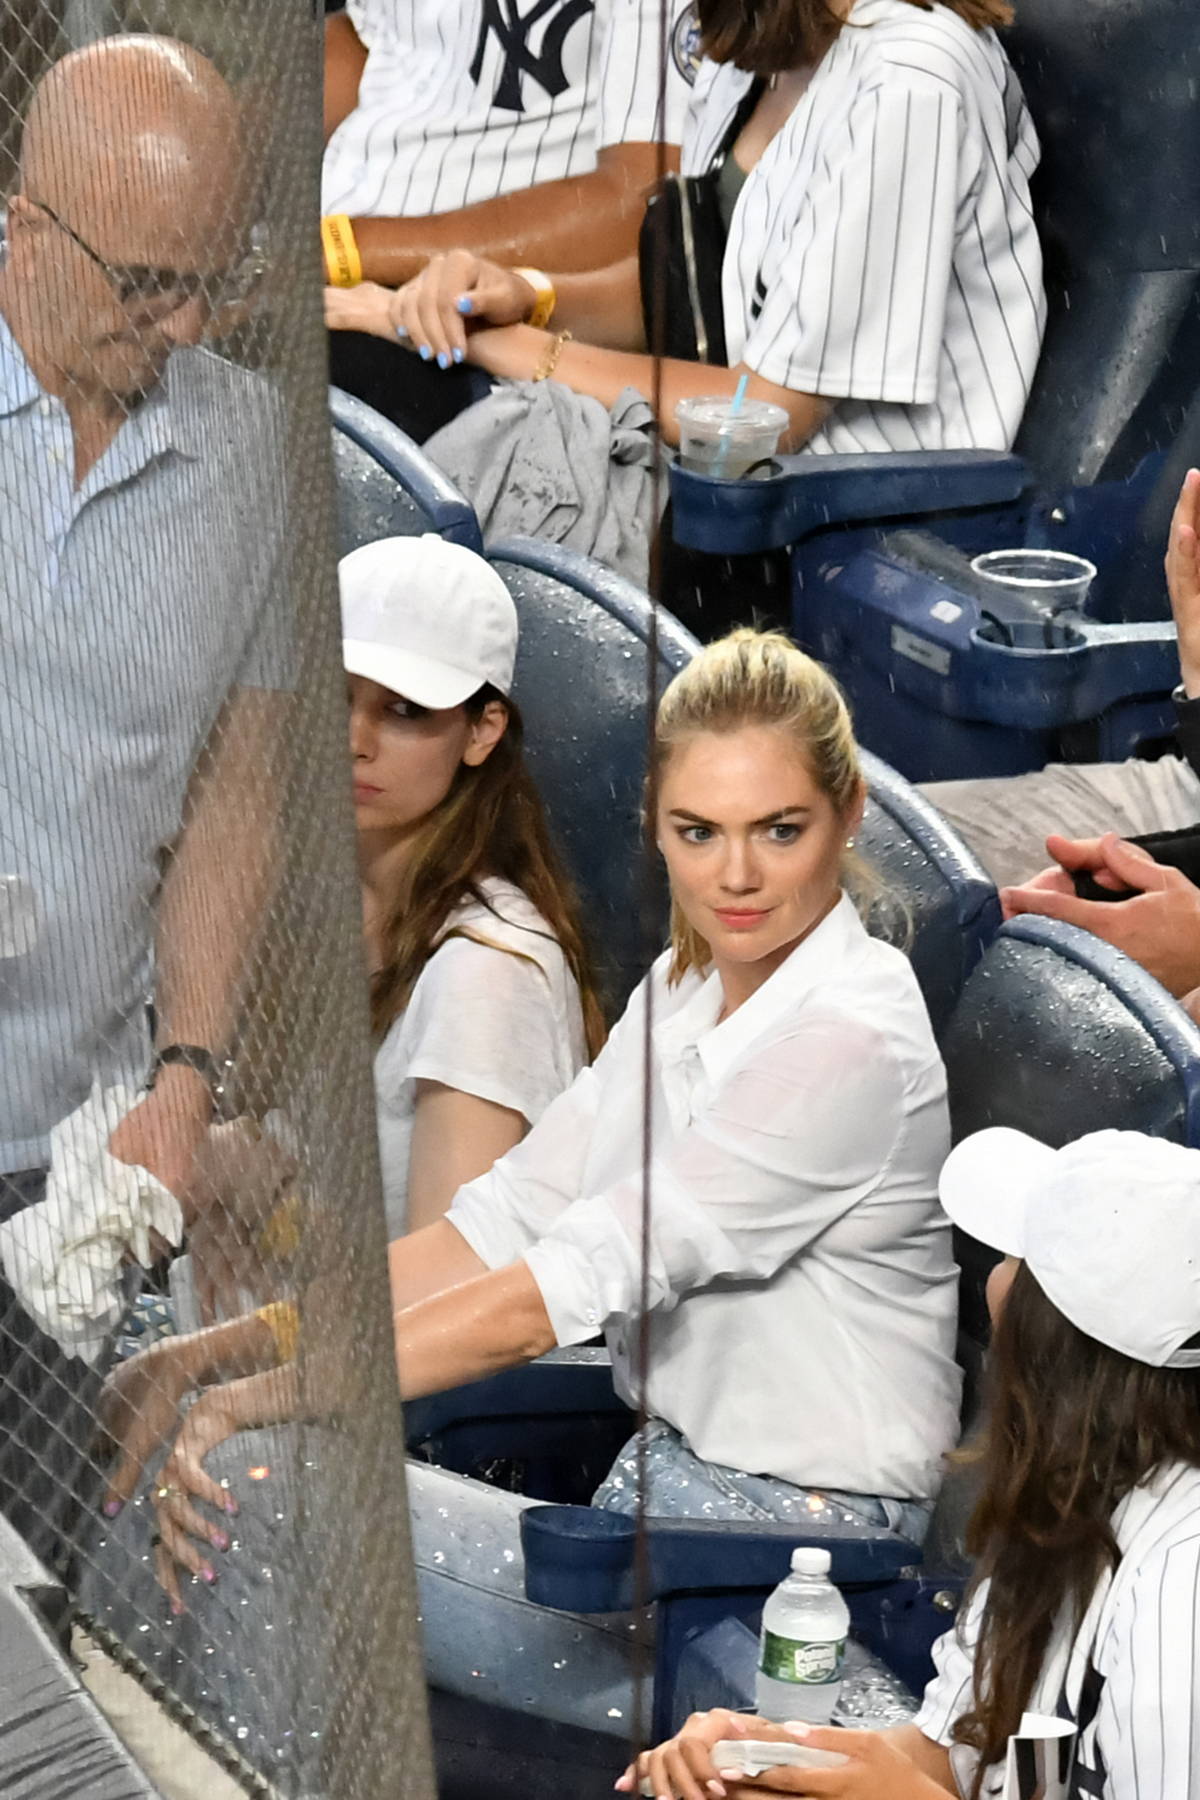 In Photos: Looking at Kate Upton's best gameday Astros fits